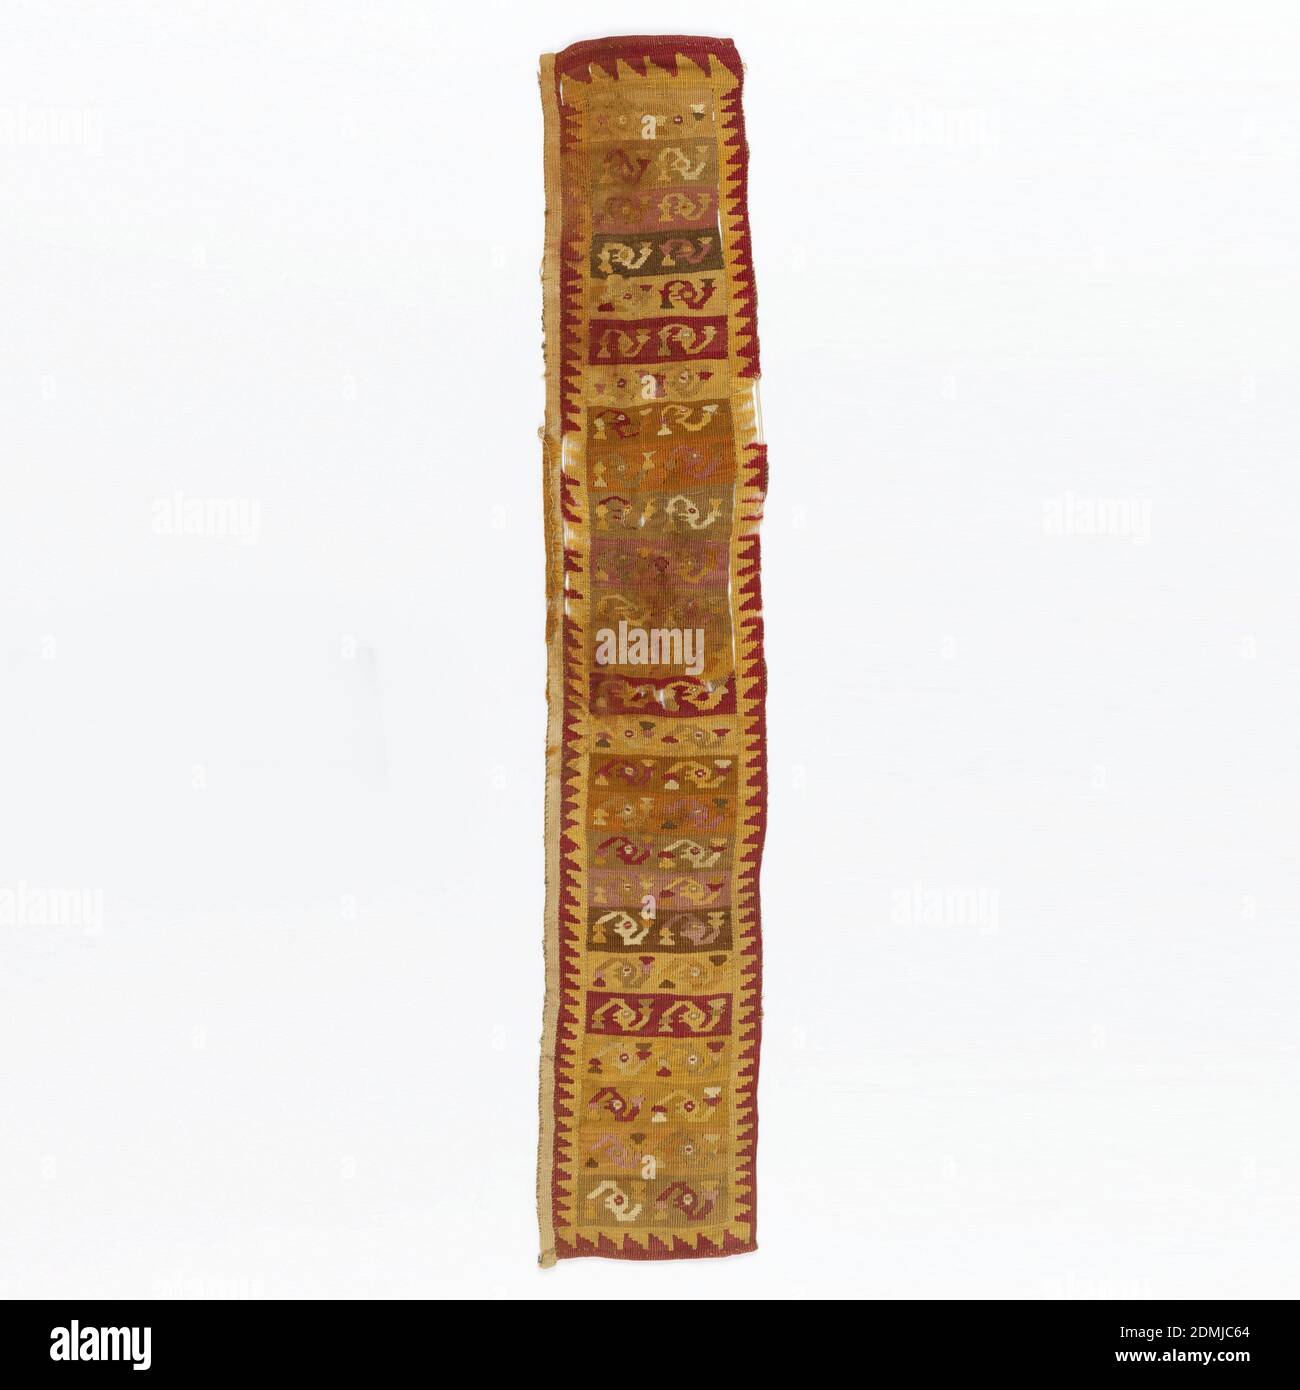 Textile, Medium: wool, cotton Technique: slit tapestry with wrapping; weft-faced plain weave; SLIT TAPESTRY: limited use of non-horizontal welts, sometimes between color areas only; two-faced; long slits are sewn together; SIDES: remains of attached fabric; ENDS: warp selvage on one end, turned udner and sewn down; other end cut, turned under, and sewn., Strip patterned by narrow bands containing bird heads (?) with tassels on backgrounds of varying colors including shades of red, pink, light brown, orange and yellow. A triangular stepped or toothed border on four sides Stock Photo